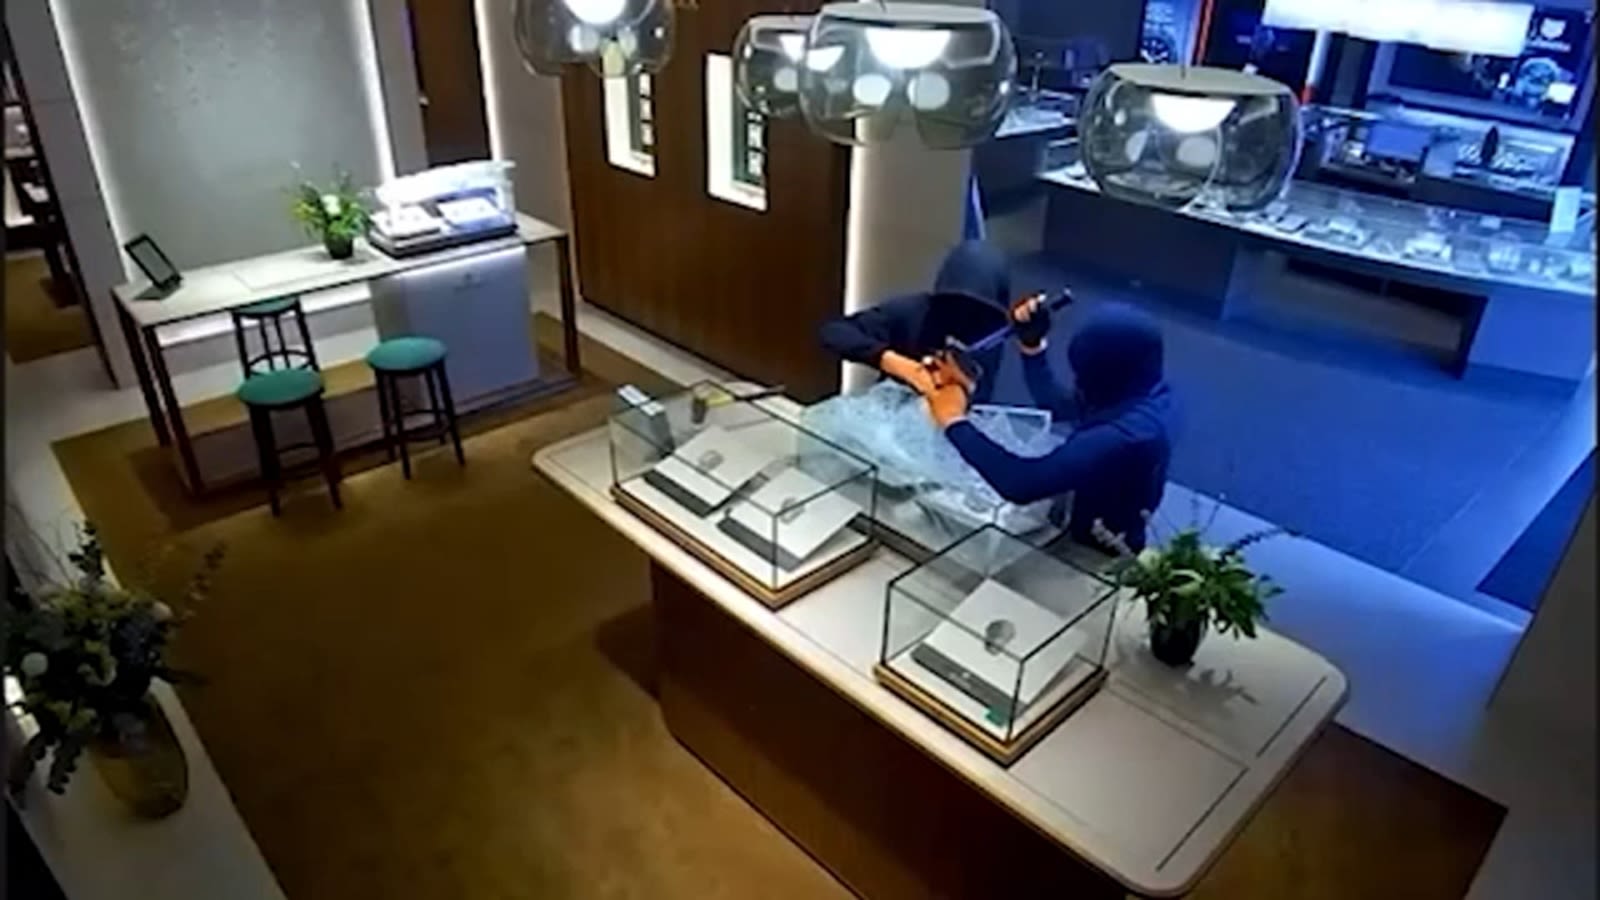 Thieves use sledgehammers in jewelry store smash-and-grab robbery in Westport | VIDEO